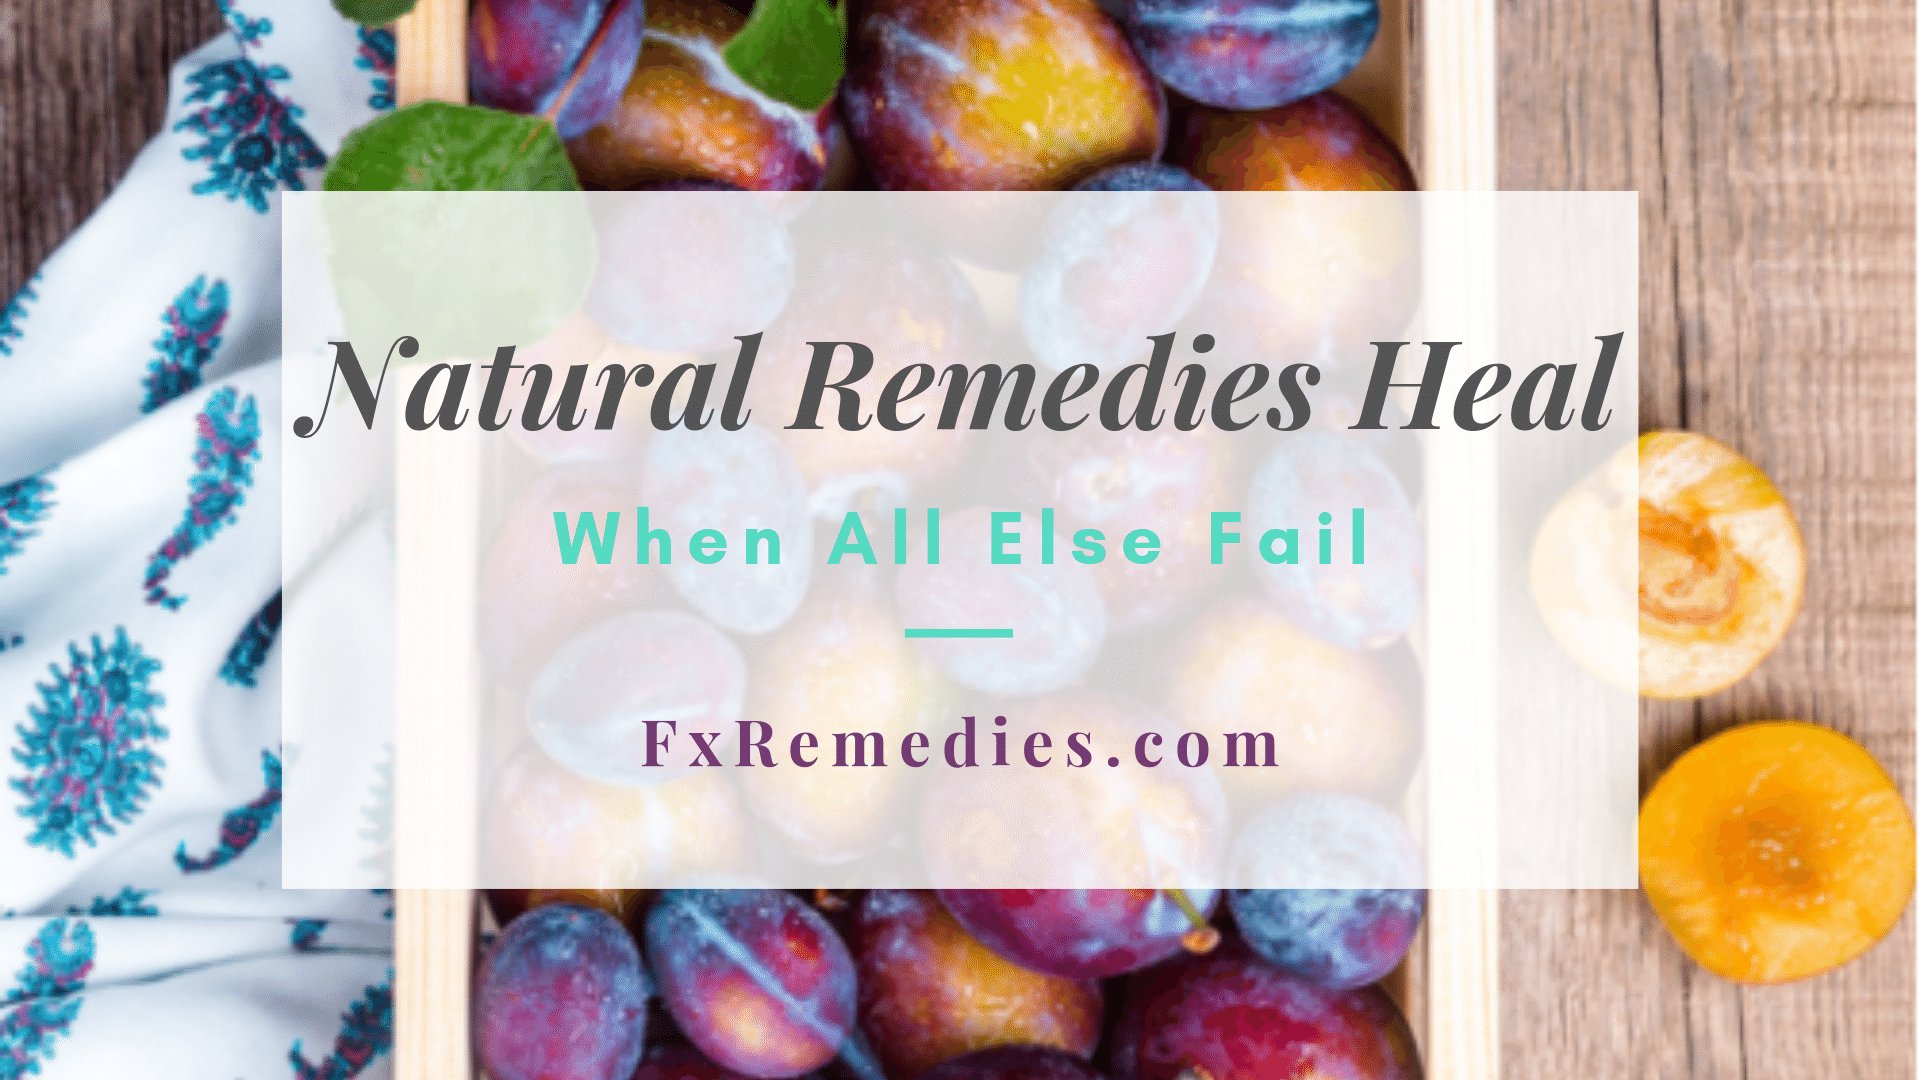 Natural remedies can be found in the Bible and we can discern through studying the natural health principles discussed in God’s word and learn his will for our health.